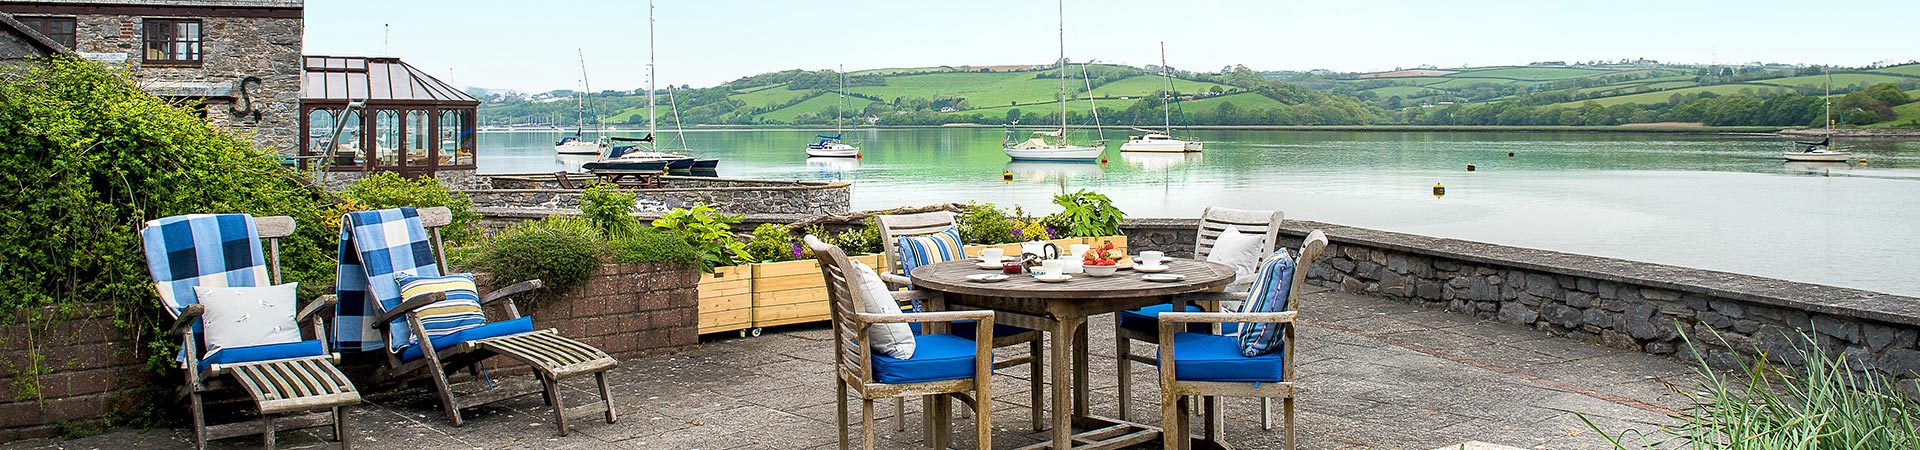 6 riverside cottages in Devon and Cornwall